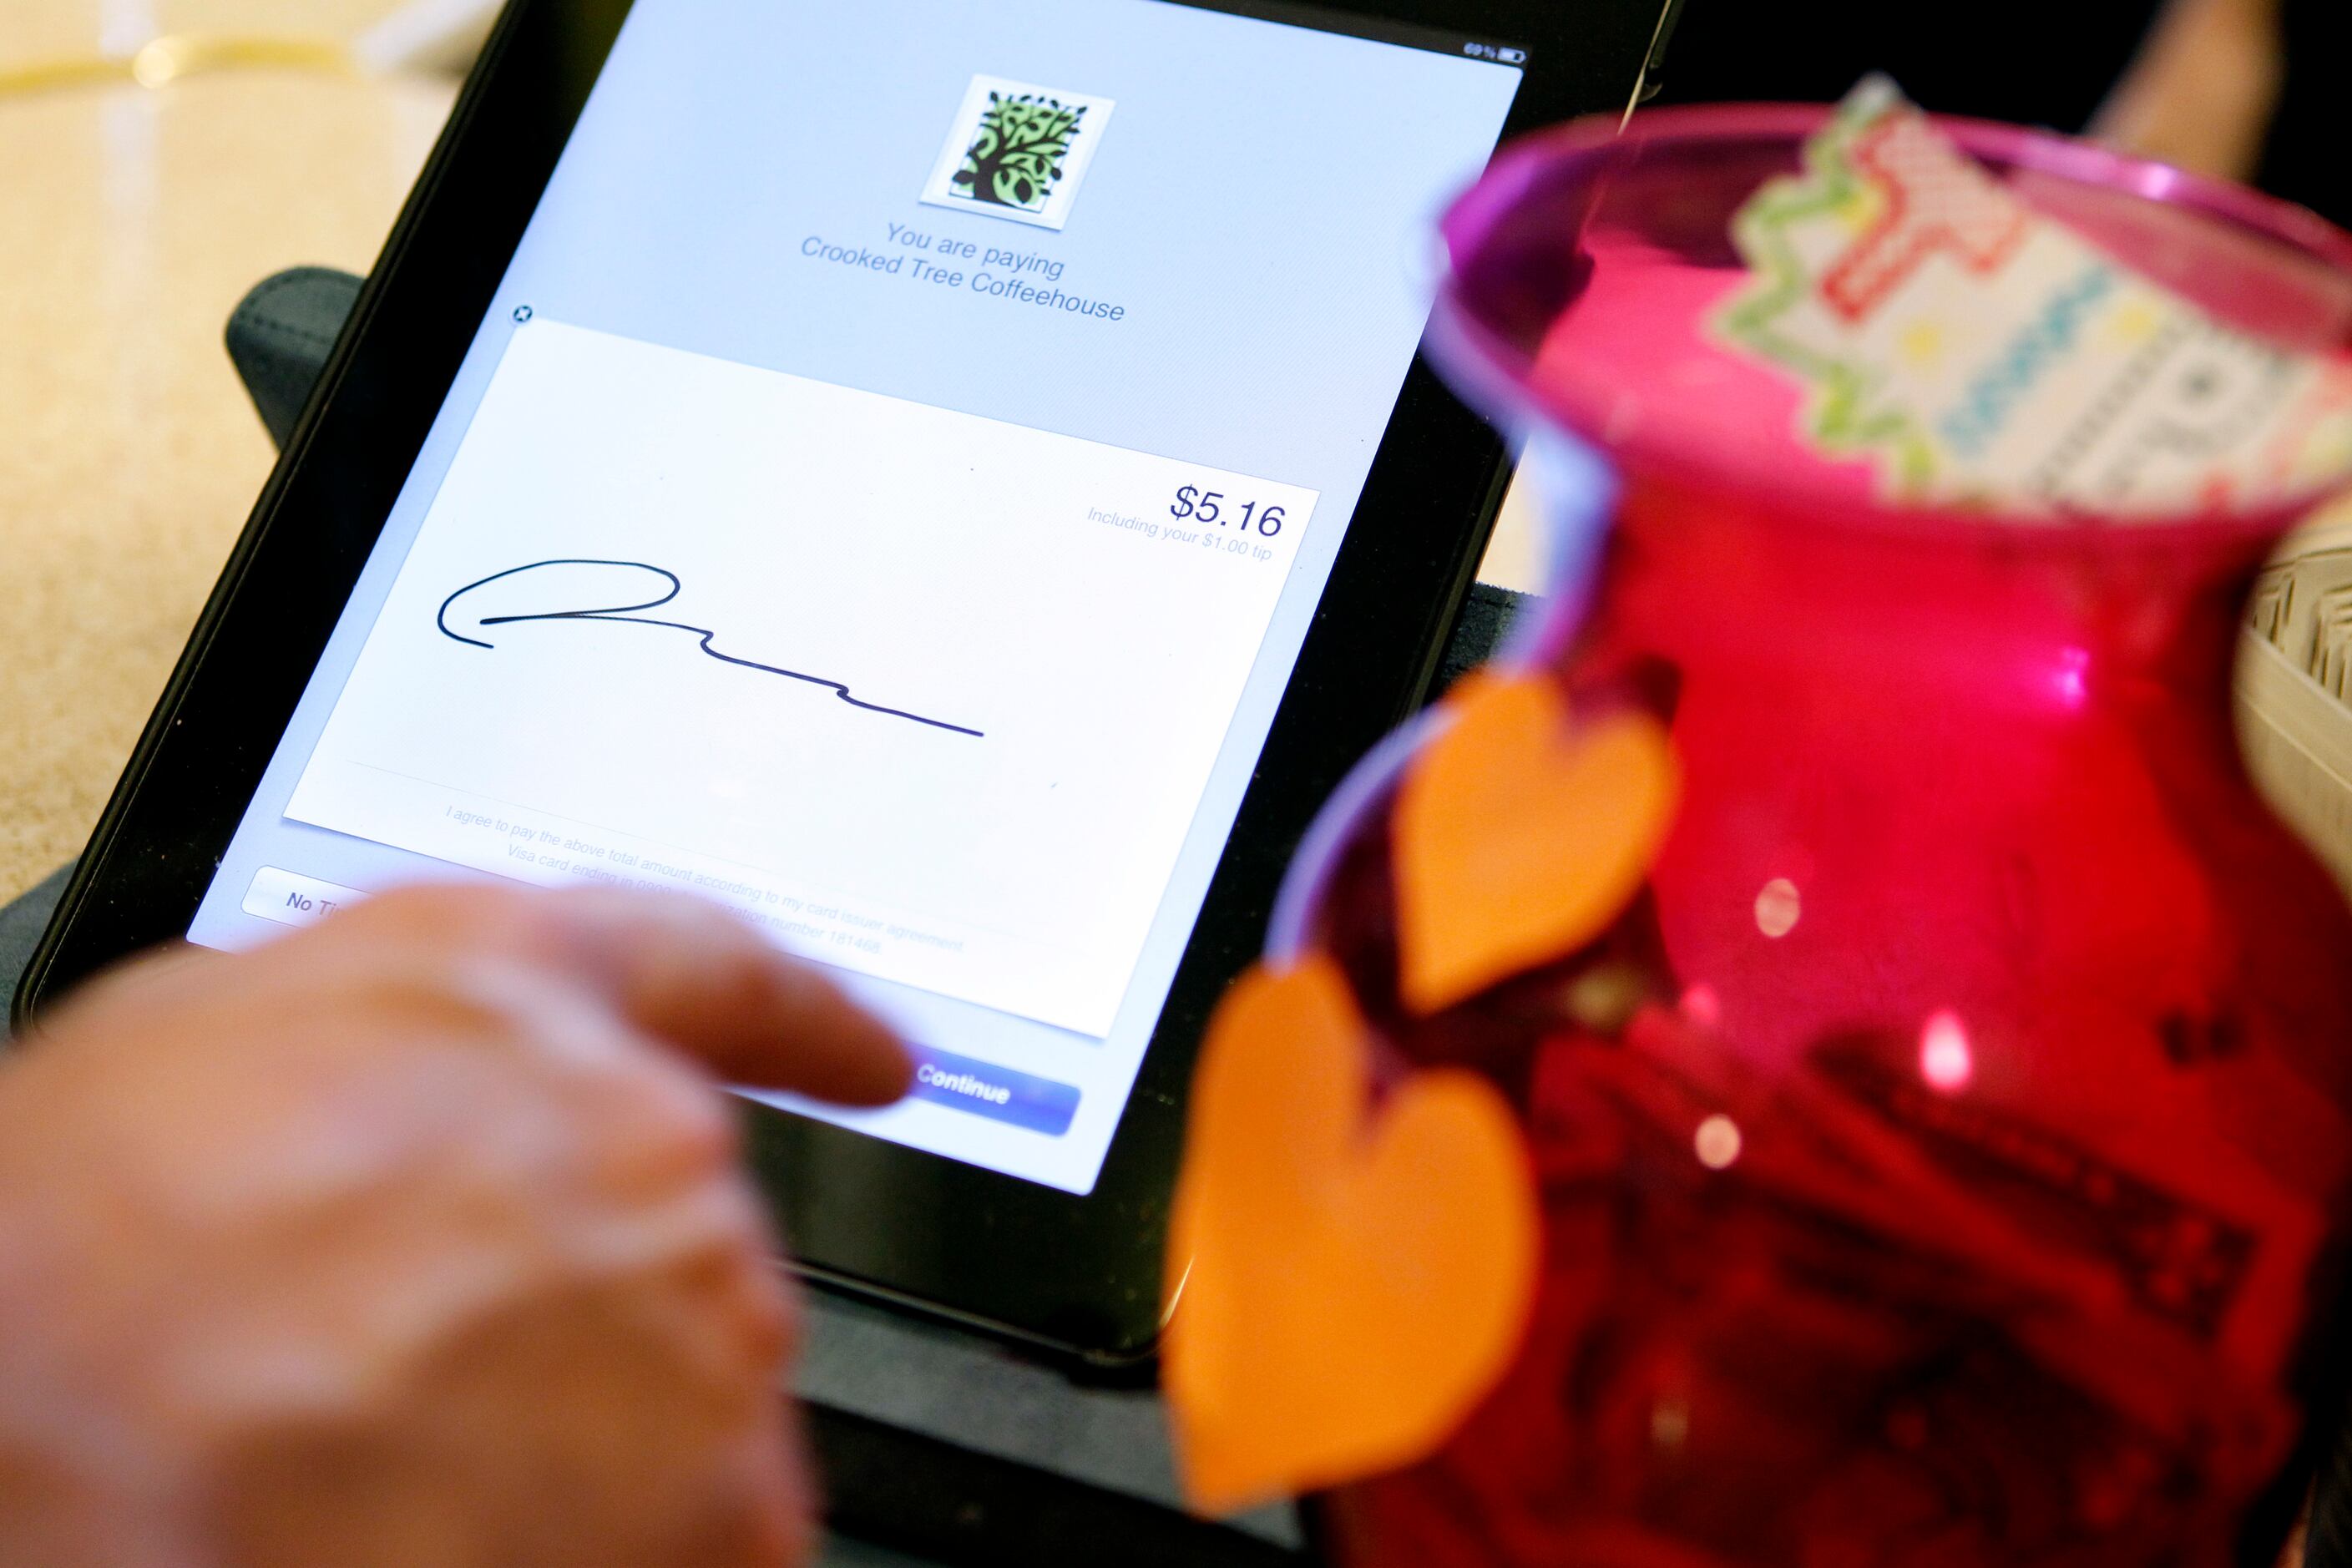 Square and Afterpay Signs New Deal For The Cash App